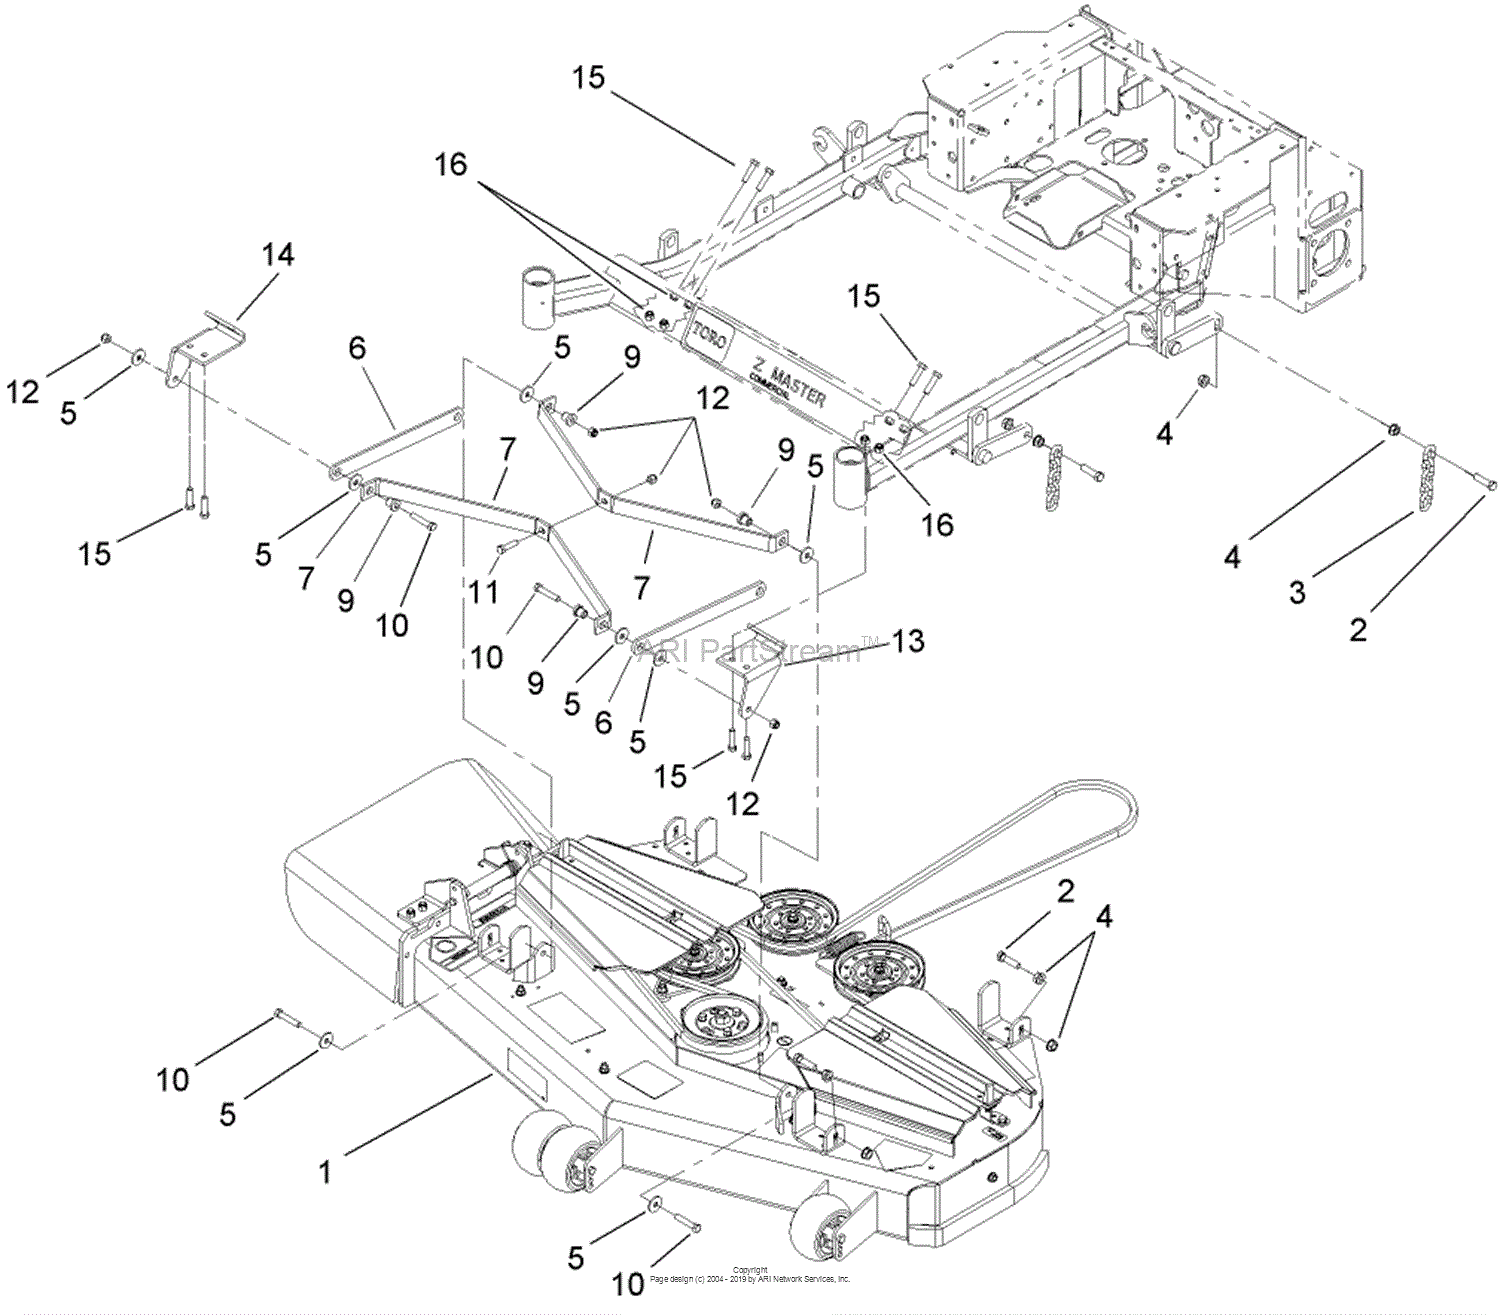 Toro Professional 74410 Z400 Z Master With 52in 7 Gauge Side Discharge Mower 2006 Sn 260000001 260002000 Parts Diagram For Deck Mounting Assembly